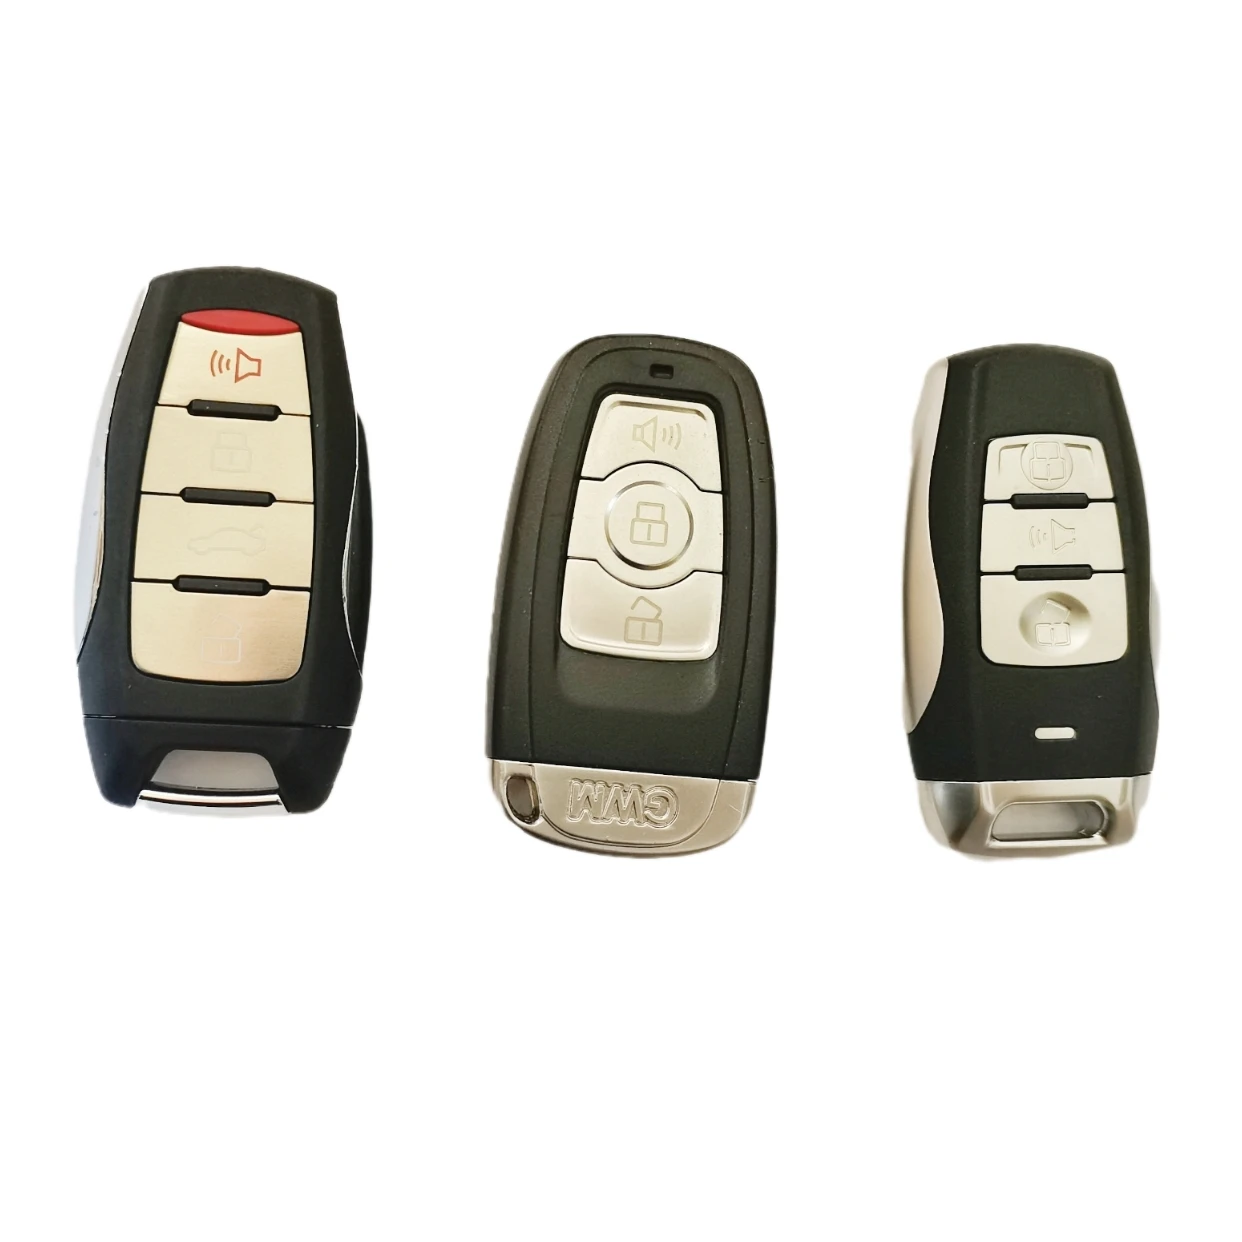 

With Logo Intelligent Remote Key 433Mhz for Great Wall GWM Haval H6 F7 F5 H7 H8 H9 Jolion H2 M6 Poer F7X Car Smart Remote Key